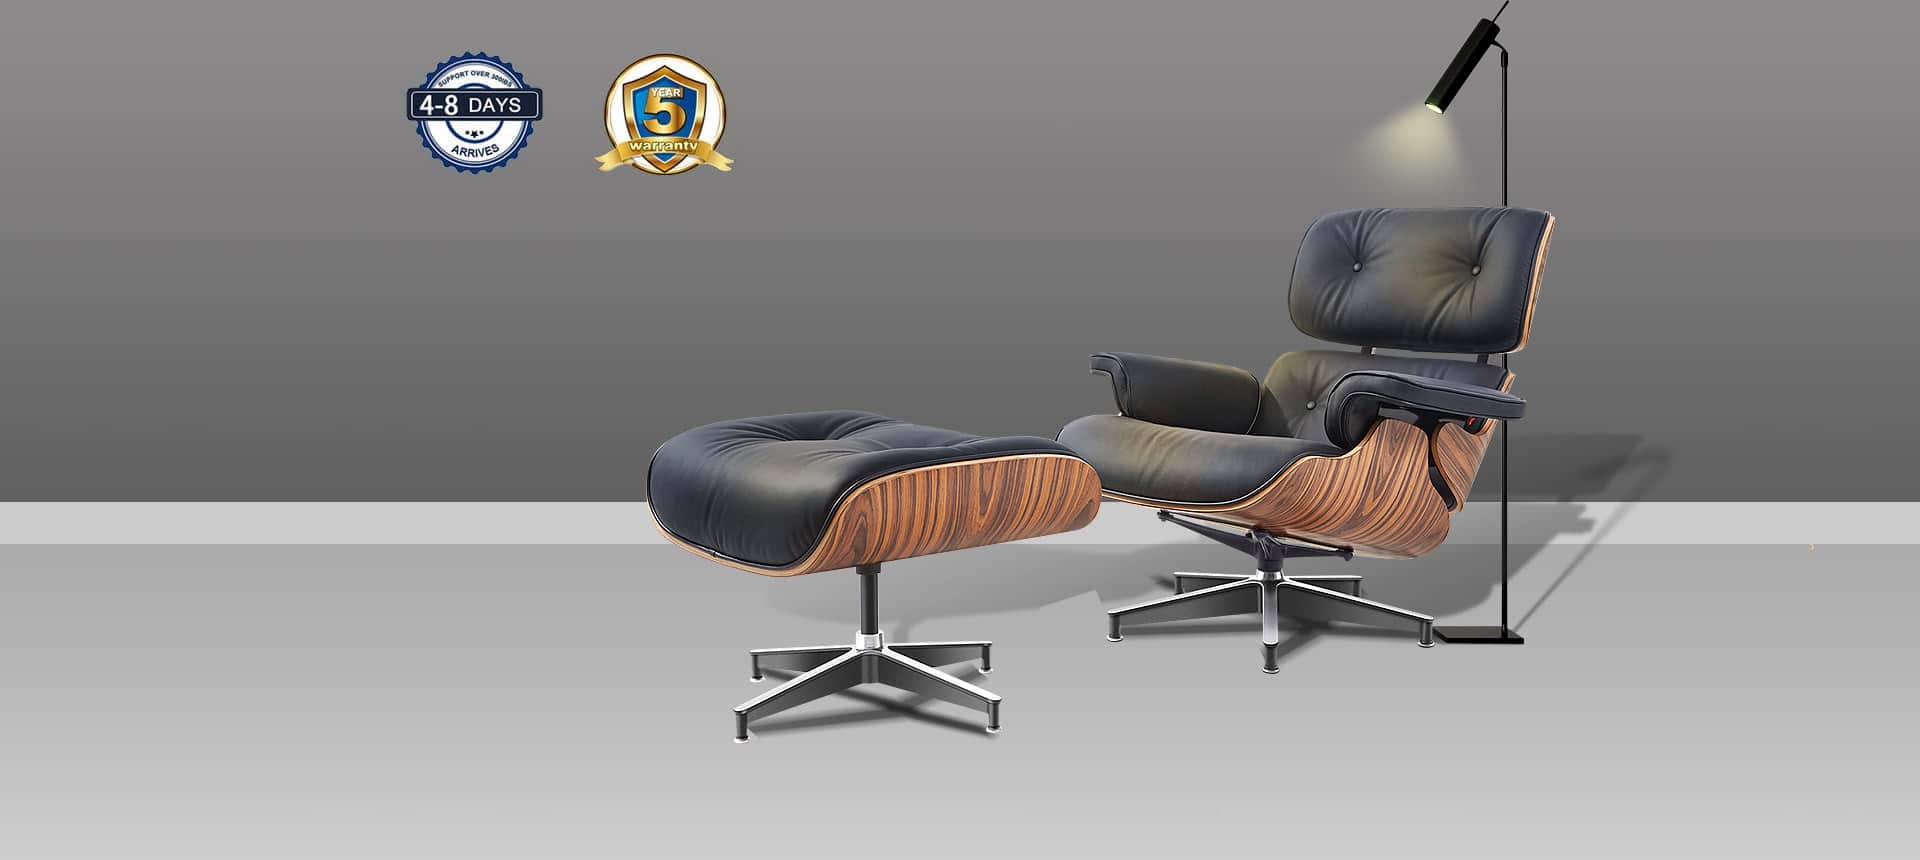 eames lounge chair aniline leather